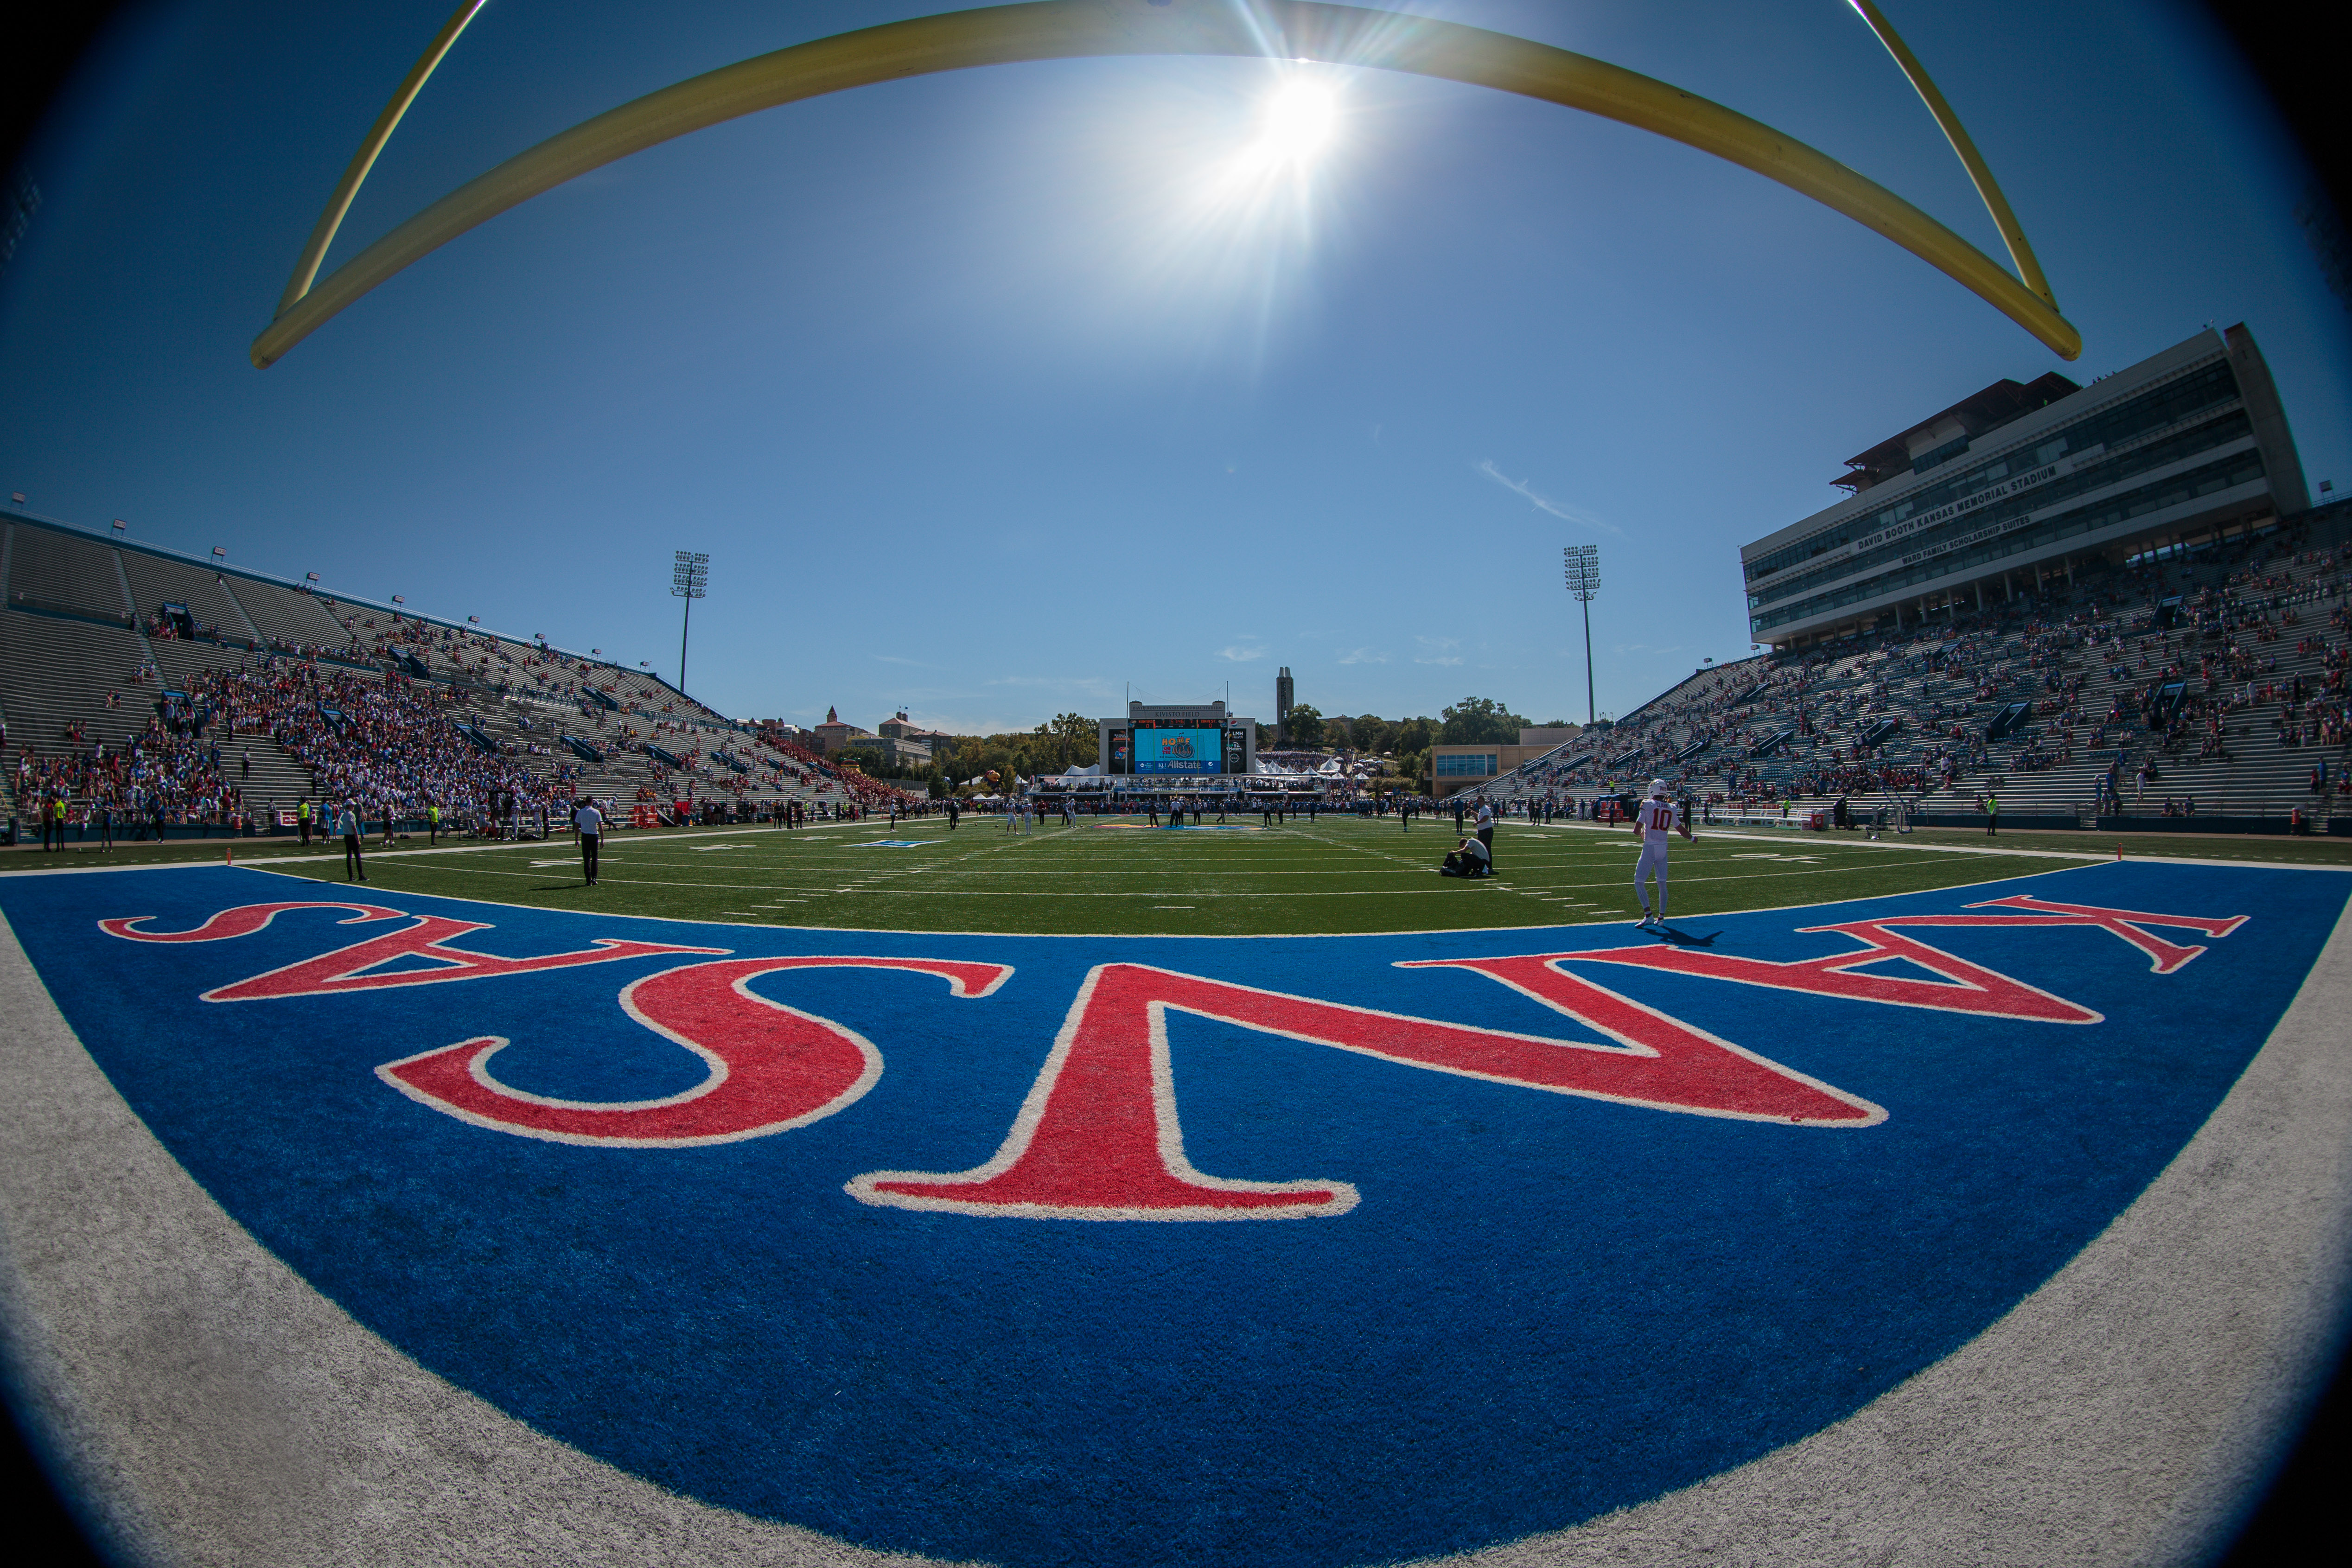 Kansas Jayhawks solidly in updated bowl predictions